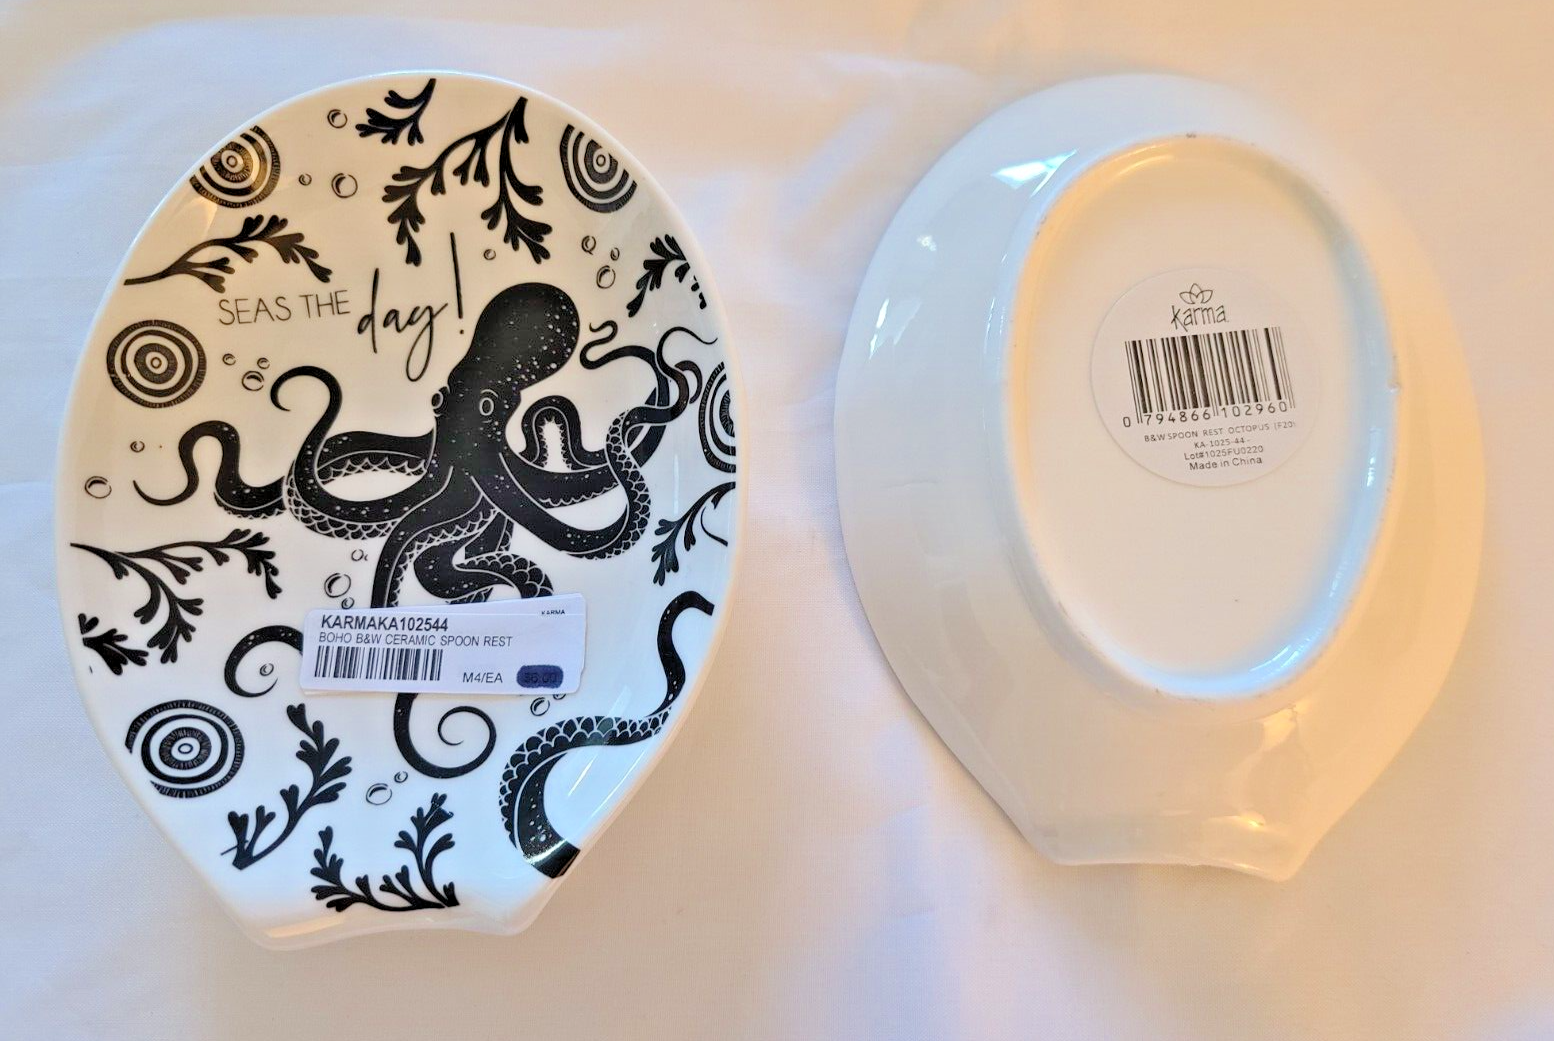 Primary image for Karma Gifts BOHO Black & White Ceramic Spoon Rest Octopus 'Seas The Day!'